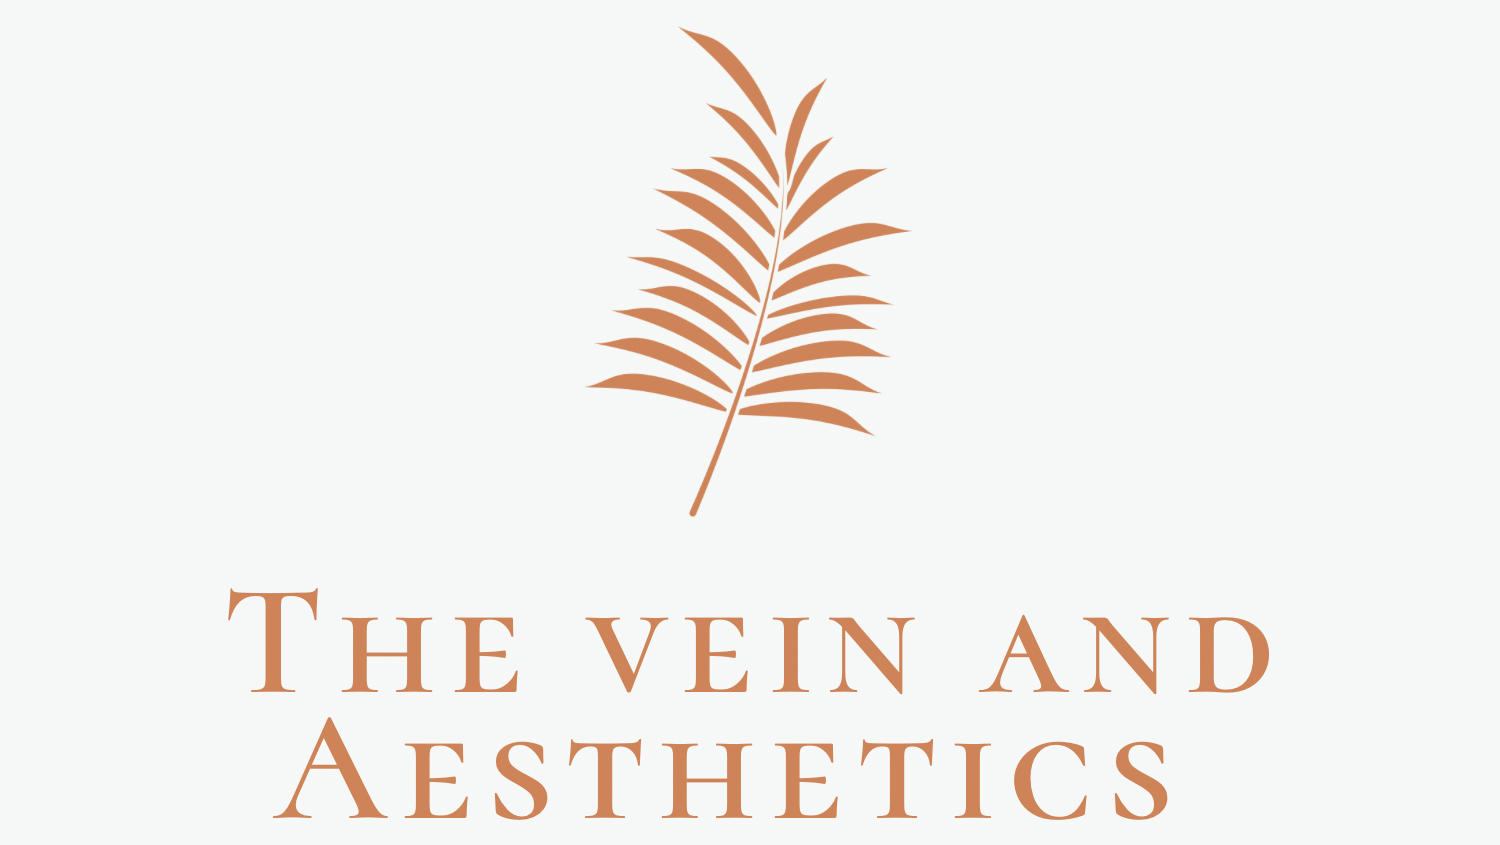 The Vein and Aesthetics clinic